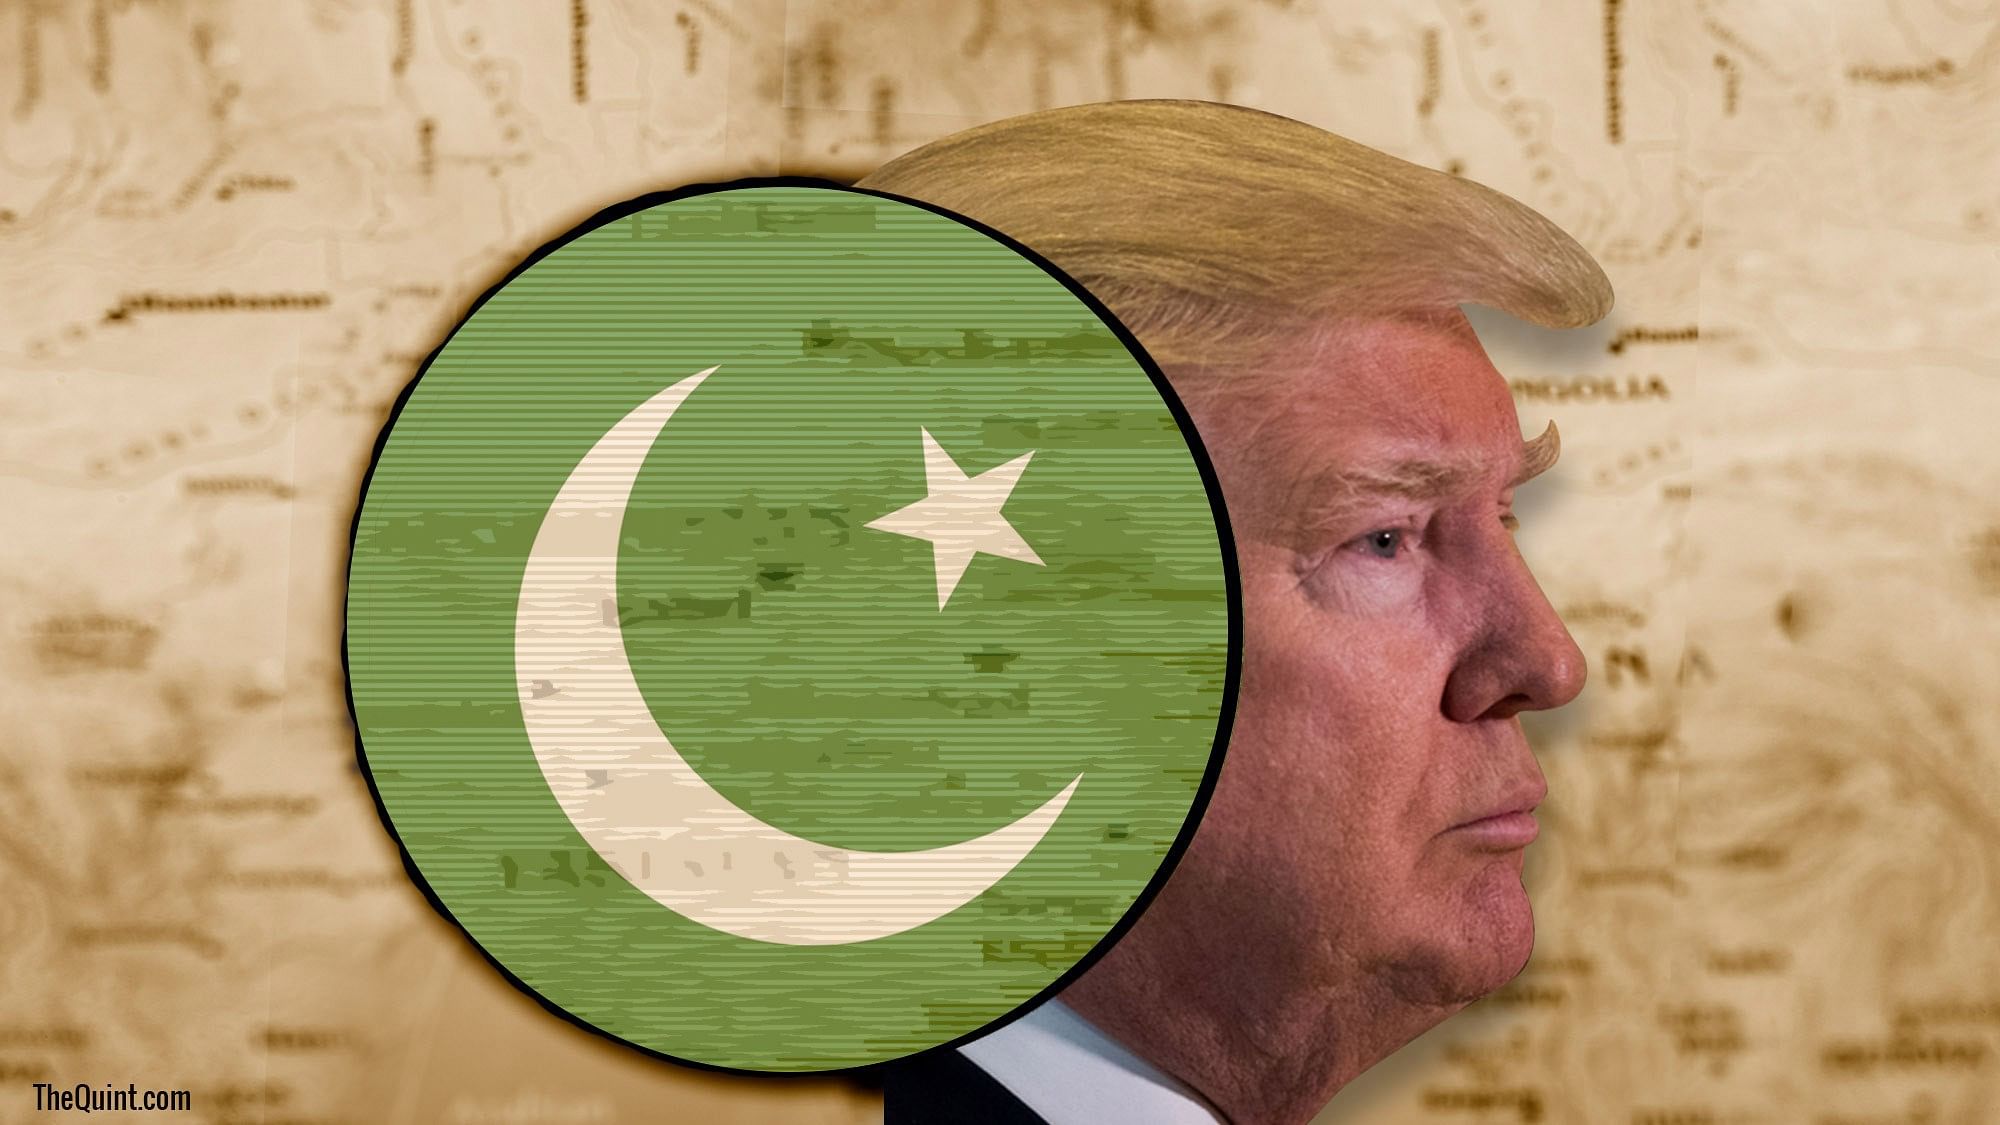 Pakistan has failed to take decisive actions against terror groups as sought by the Trump administration, the White House said